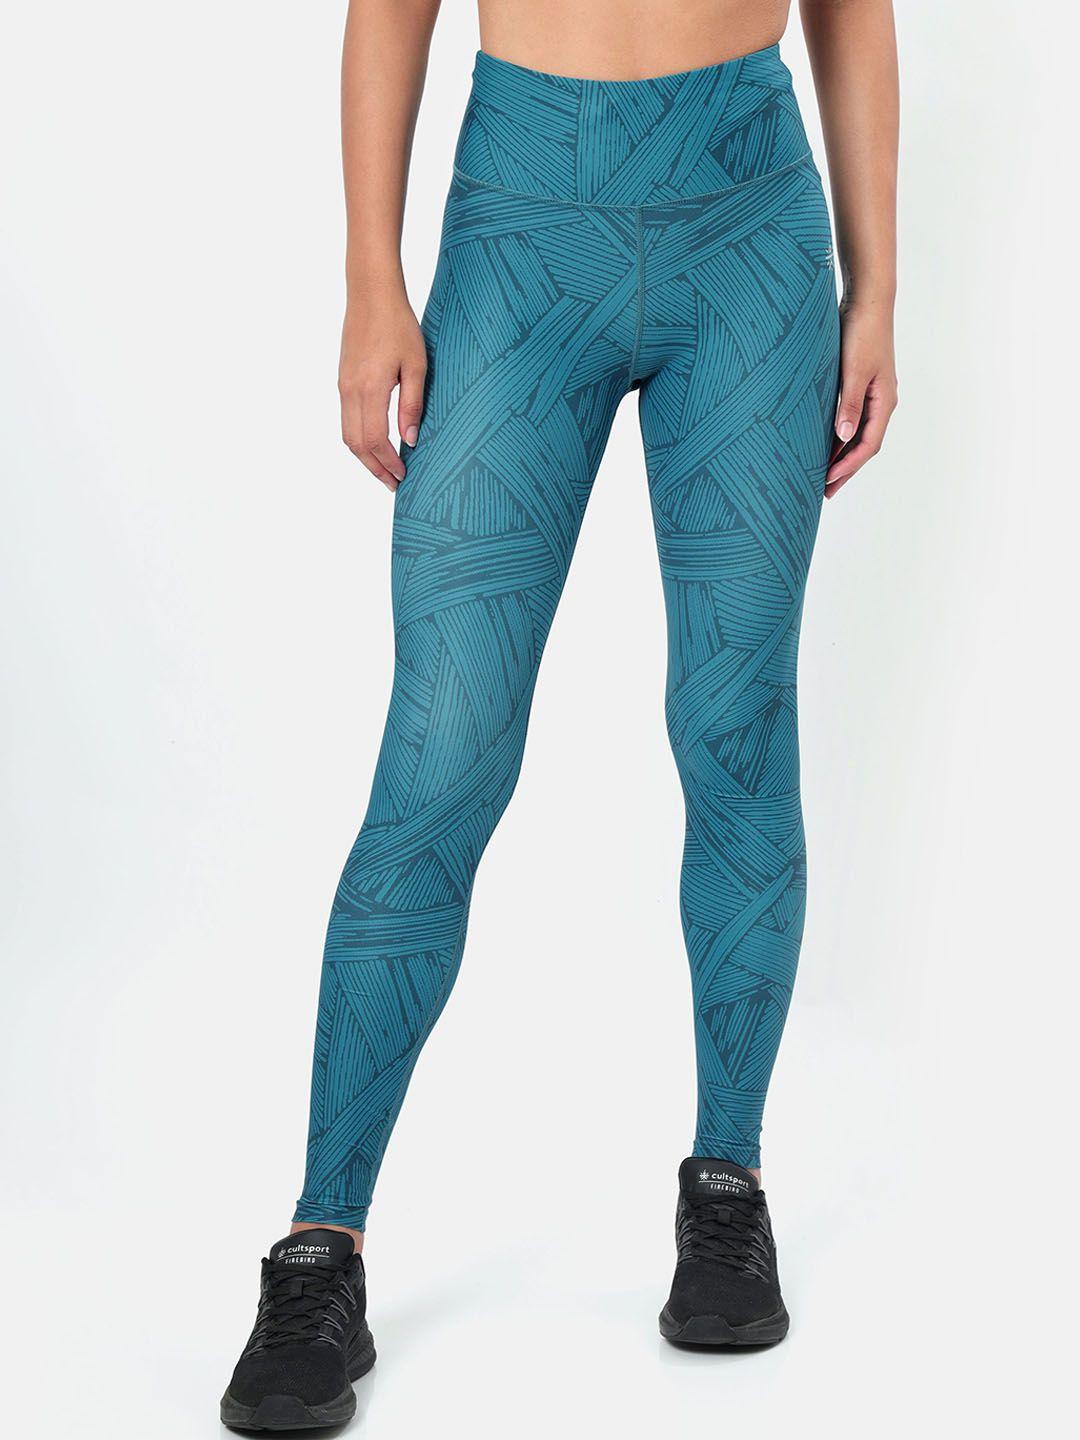 cultsport women teal blue & grey printed absolute fit sports tights